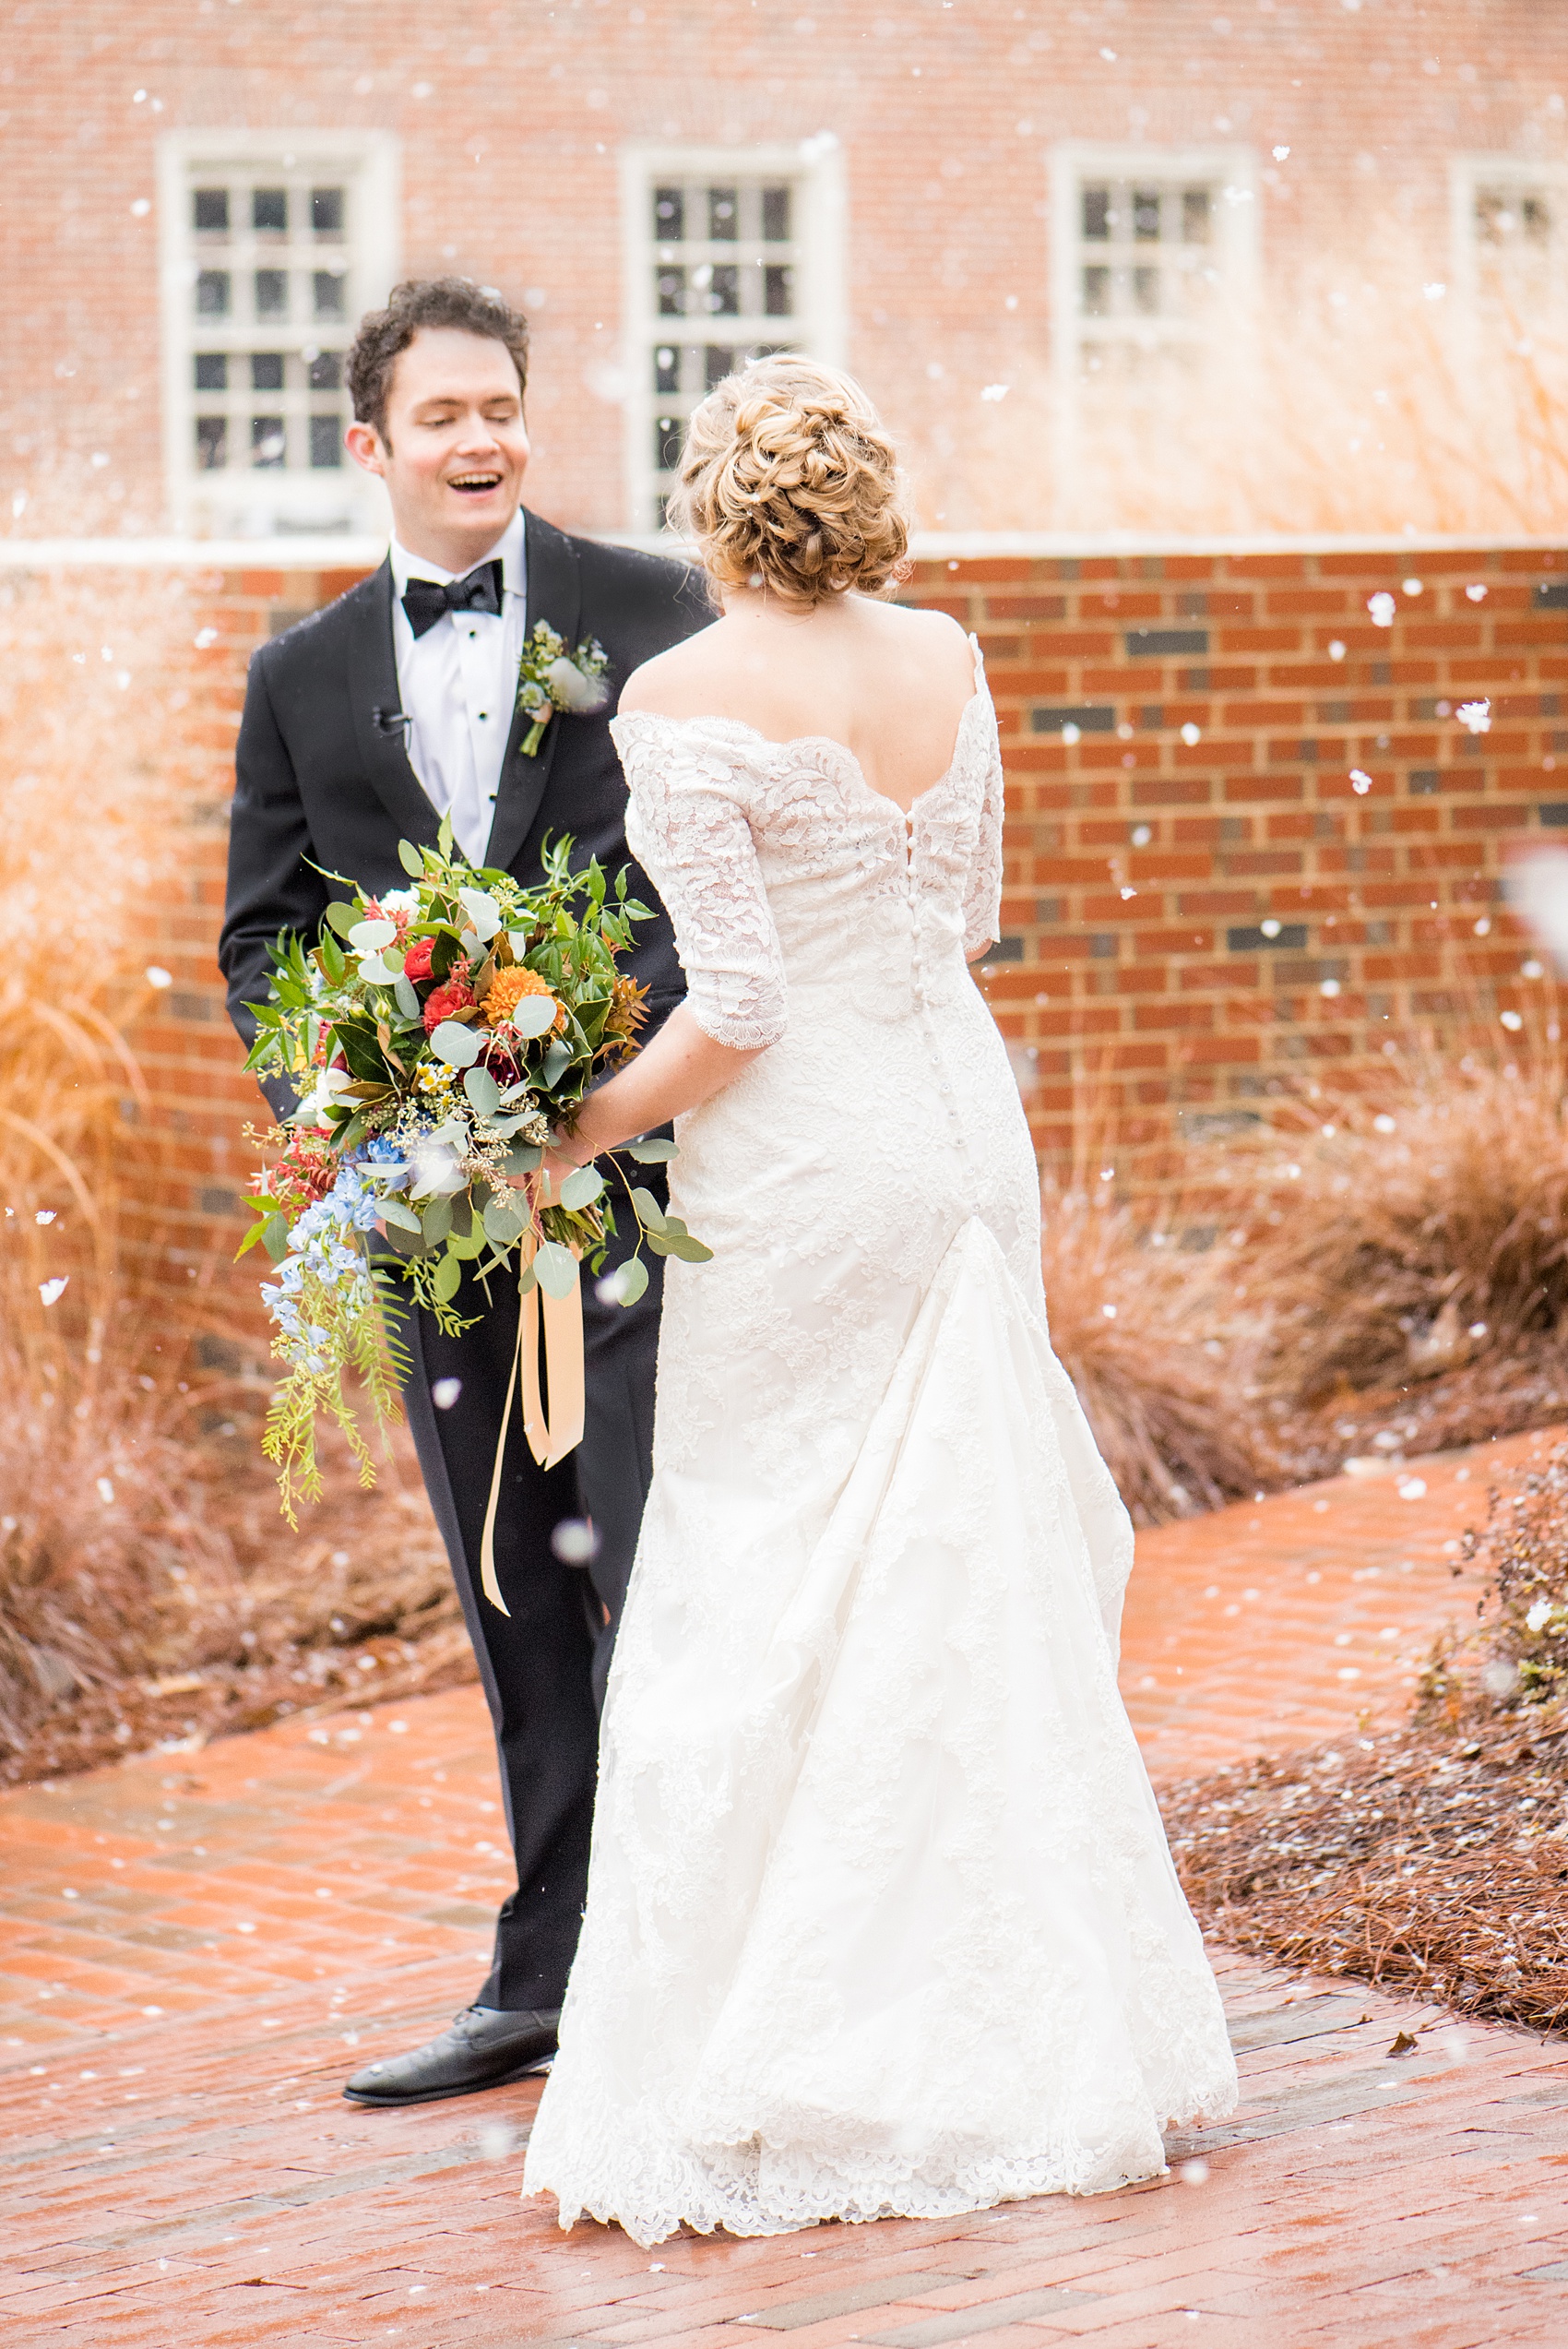 Beautiful wedding photos at The Carolina Inn at Chapel Hill, North Carolina by Mikkel Paige Photography. The bride walked through falling snow for their winter wonderland first look! Click through to see the rest of this gorgeous winter wedding! #thecarolinainn #snowywedding